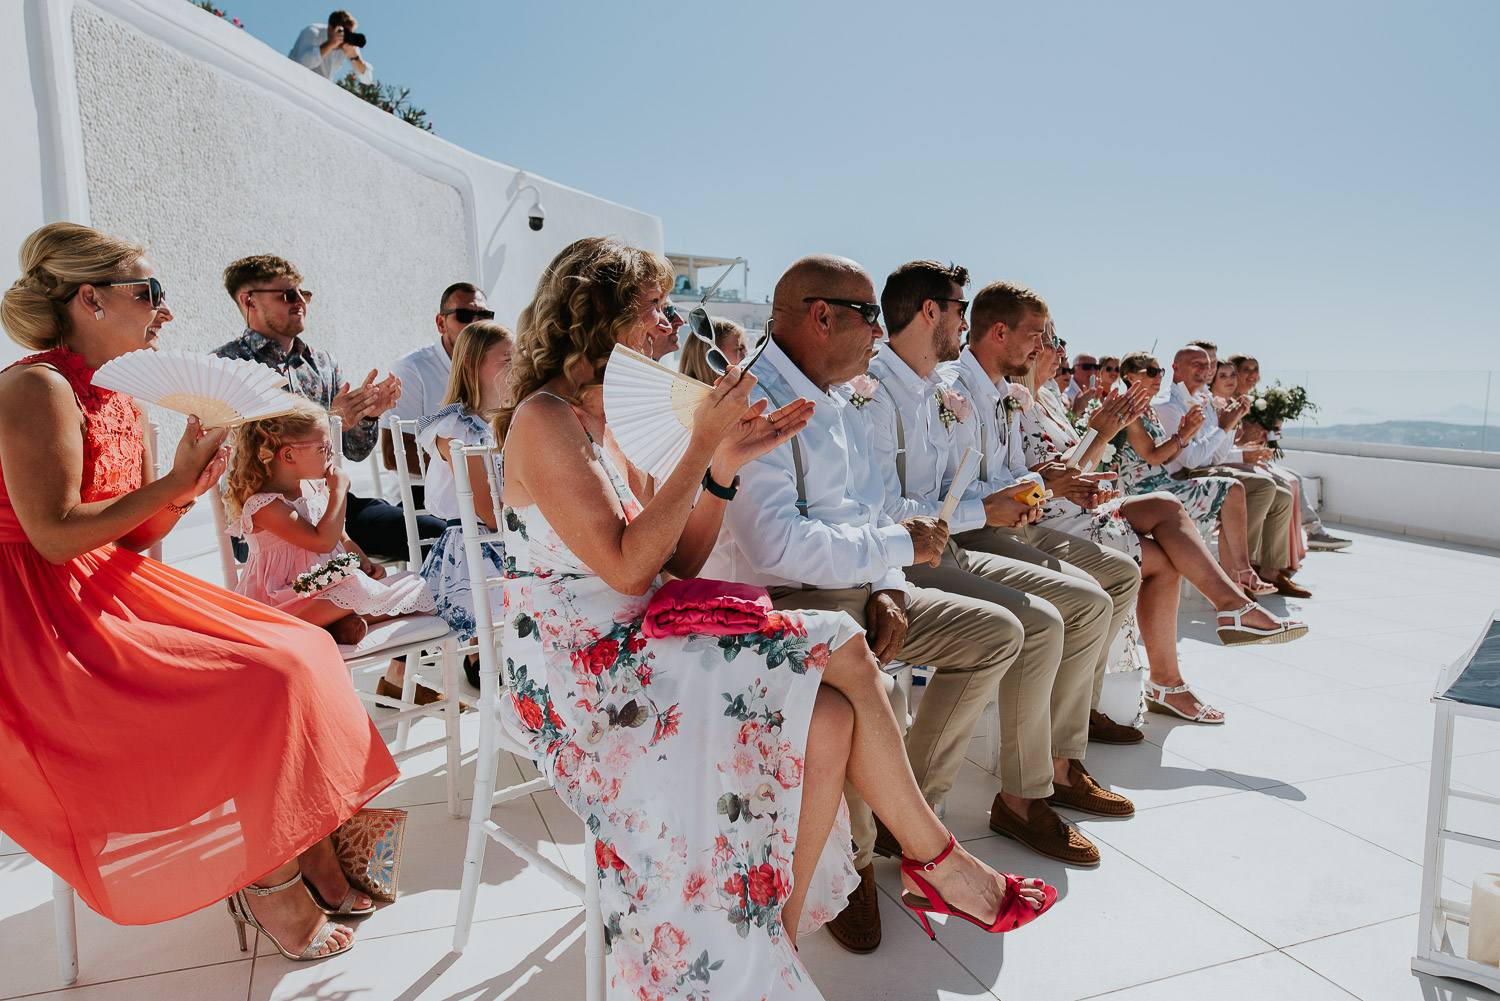 Wedding photographer Santorini: guests clap sat at the ceremony terrace basked in the summer sun by Ben and Vesna.